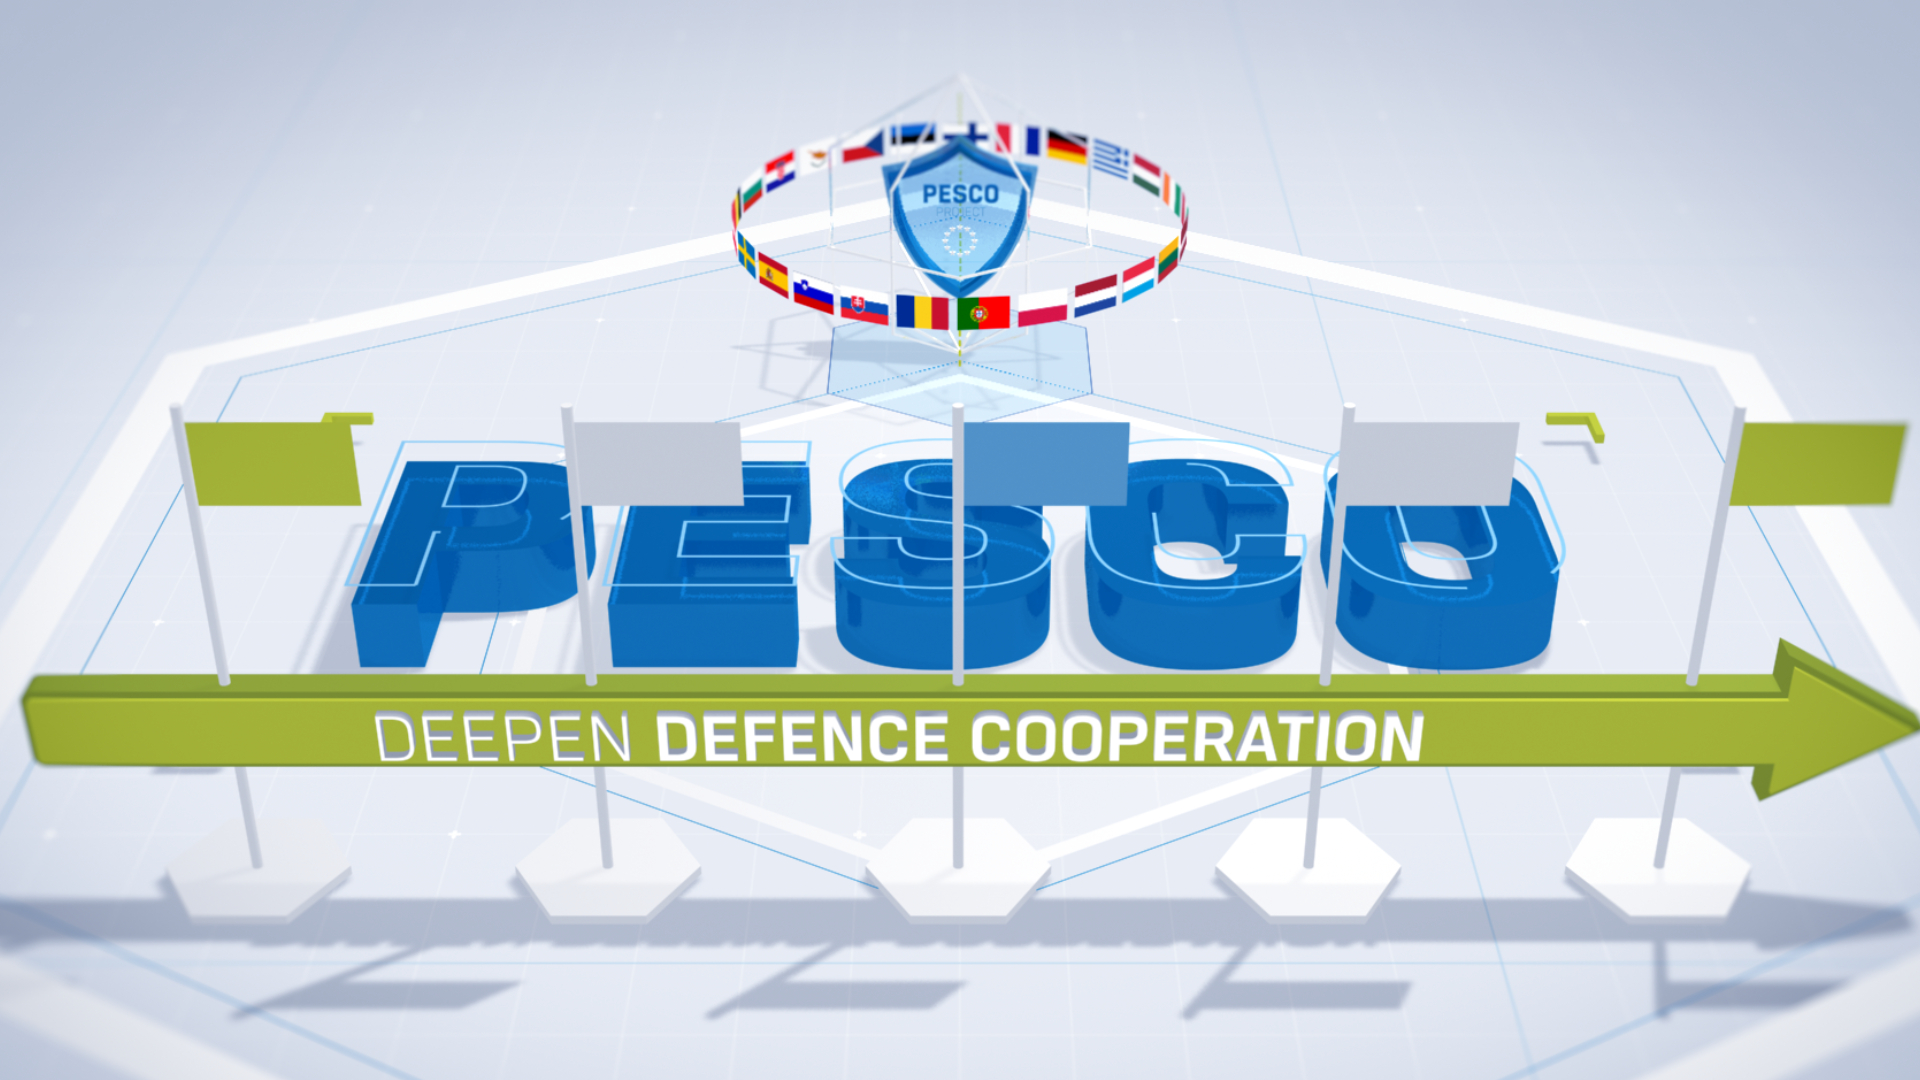 14 New PESCO Projects Launched in Boost for European Defence Cooperation